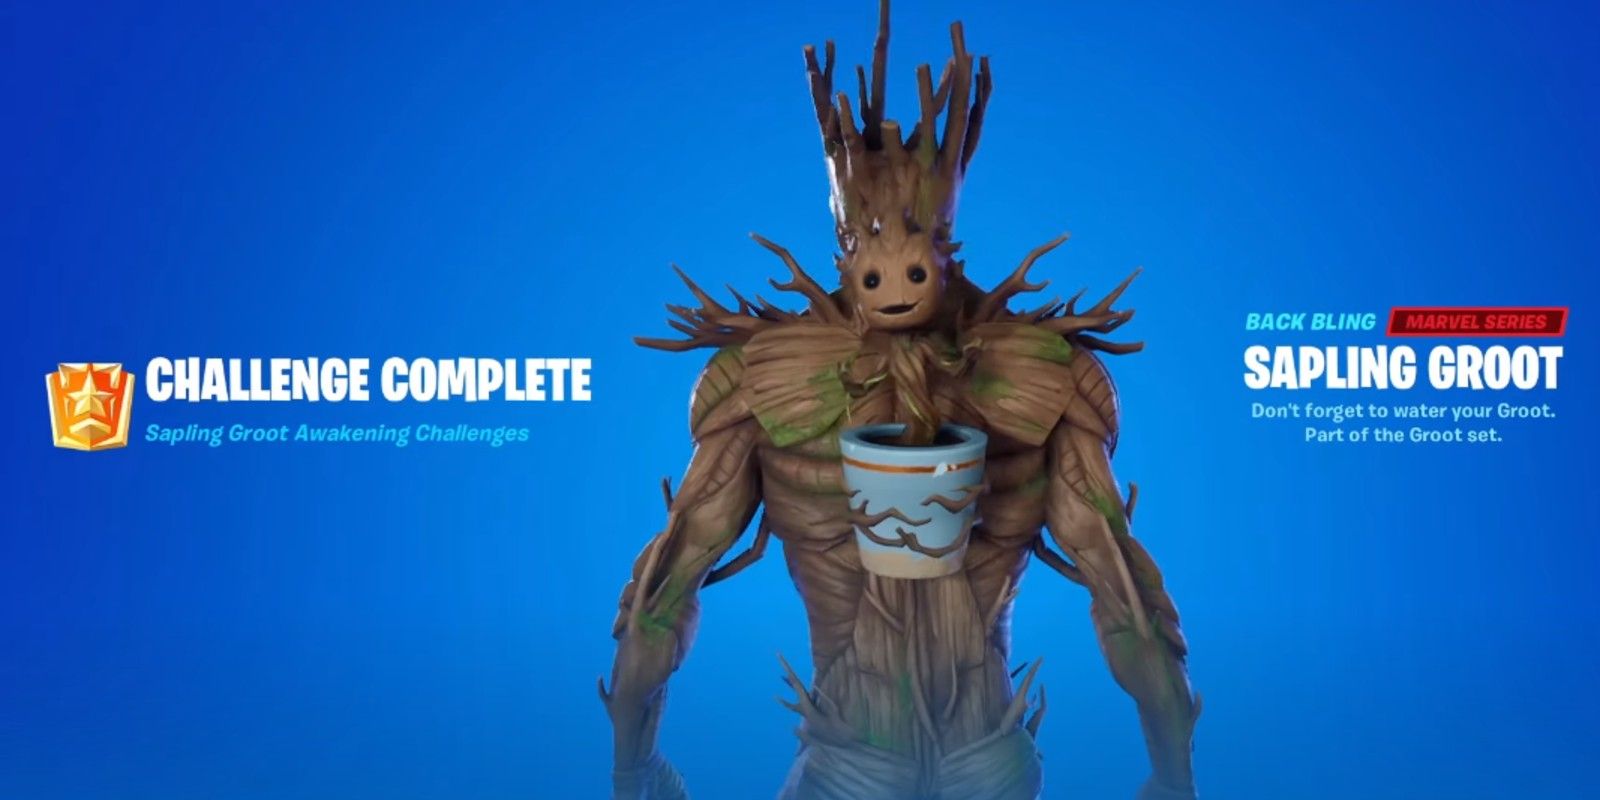 Players can unlock the Groot skin and its Baby Groot accessory in Fortnite Season 4